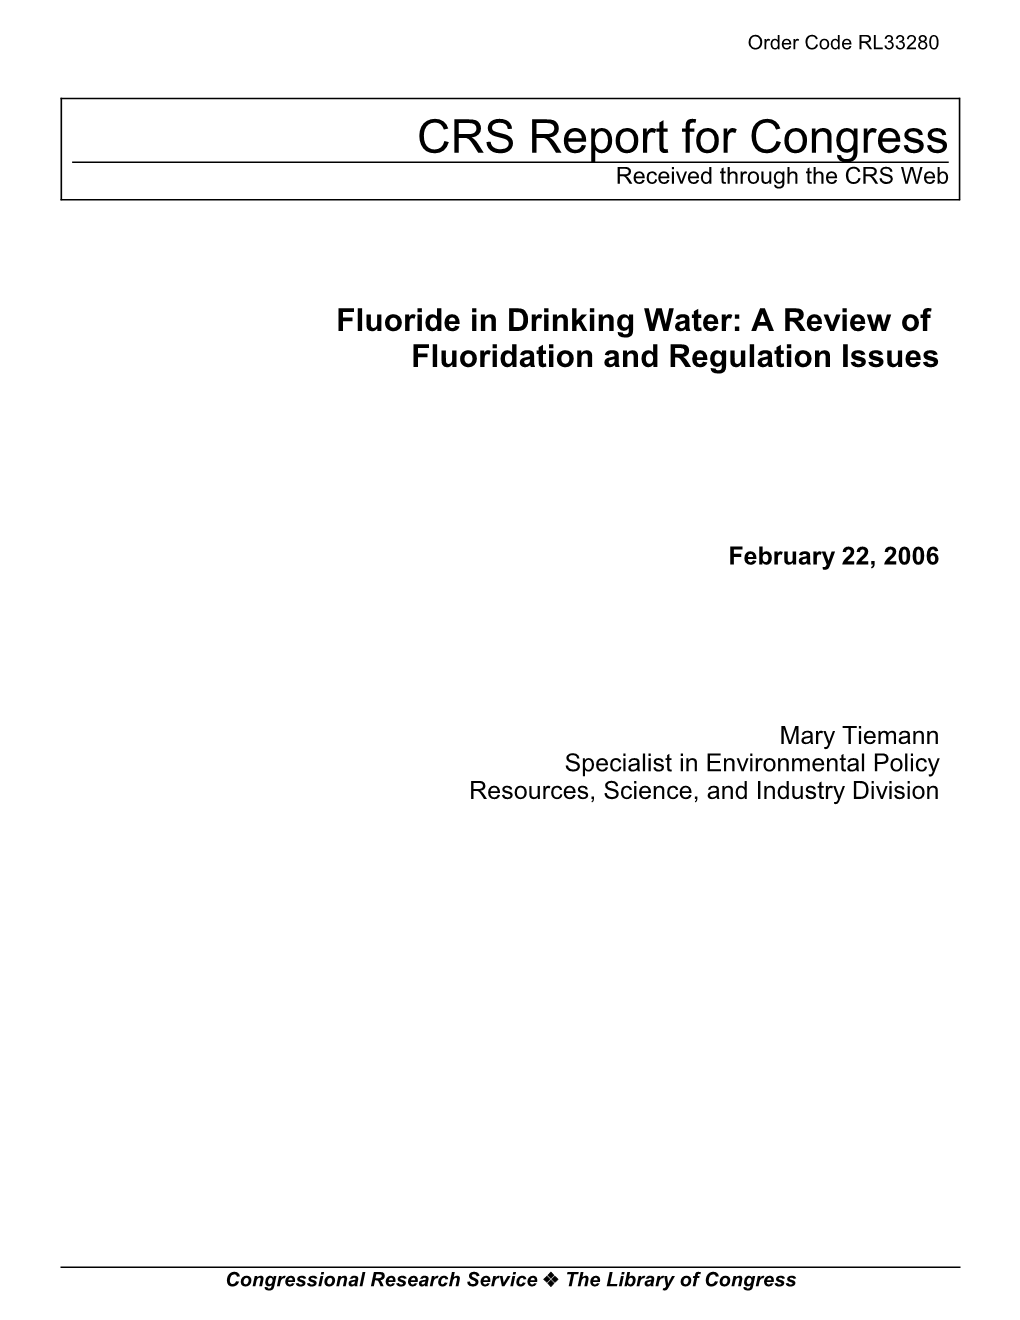 Fluoride in Drinking Water: a Review of Fluoridation and Regulation Issues